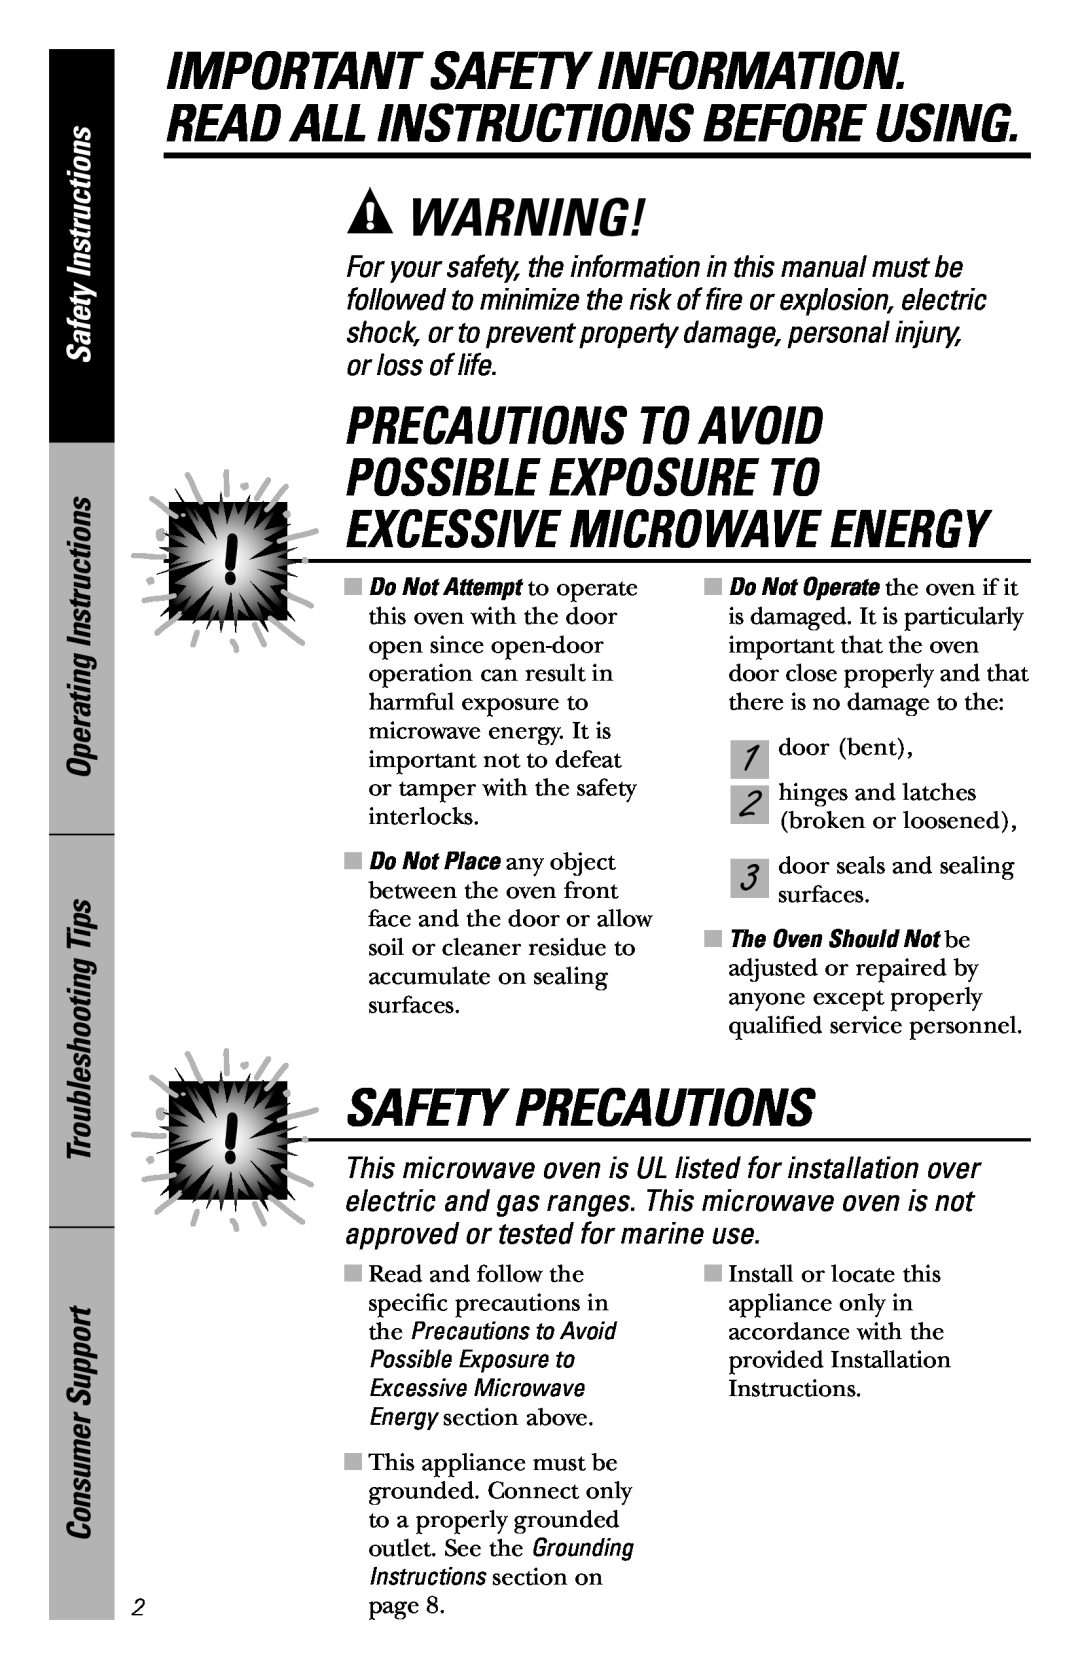 GE JVM3660WD Precautions To Avoid Possible Exposure To, Safety Precautions, Excessive Microwave Energy, Instructions 